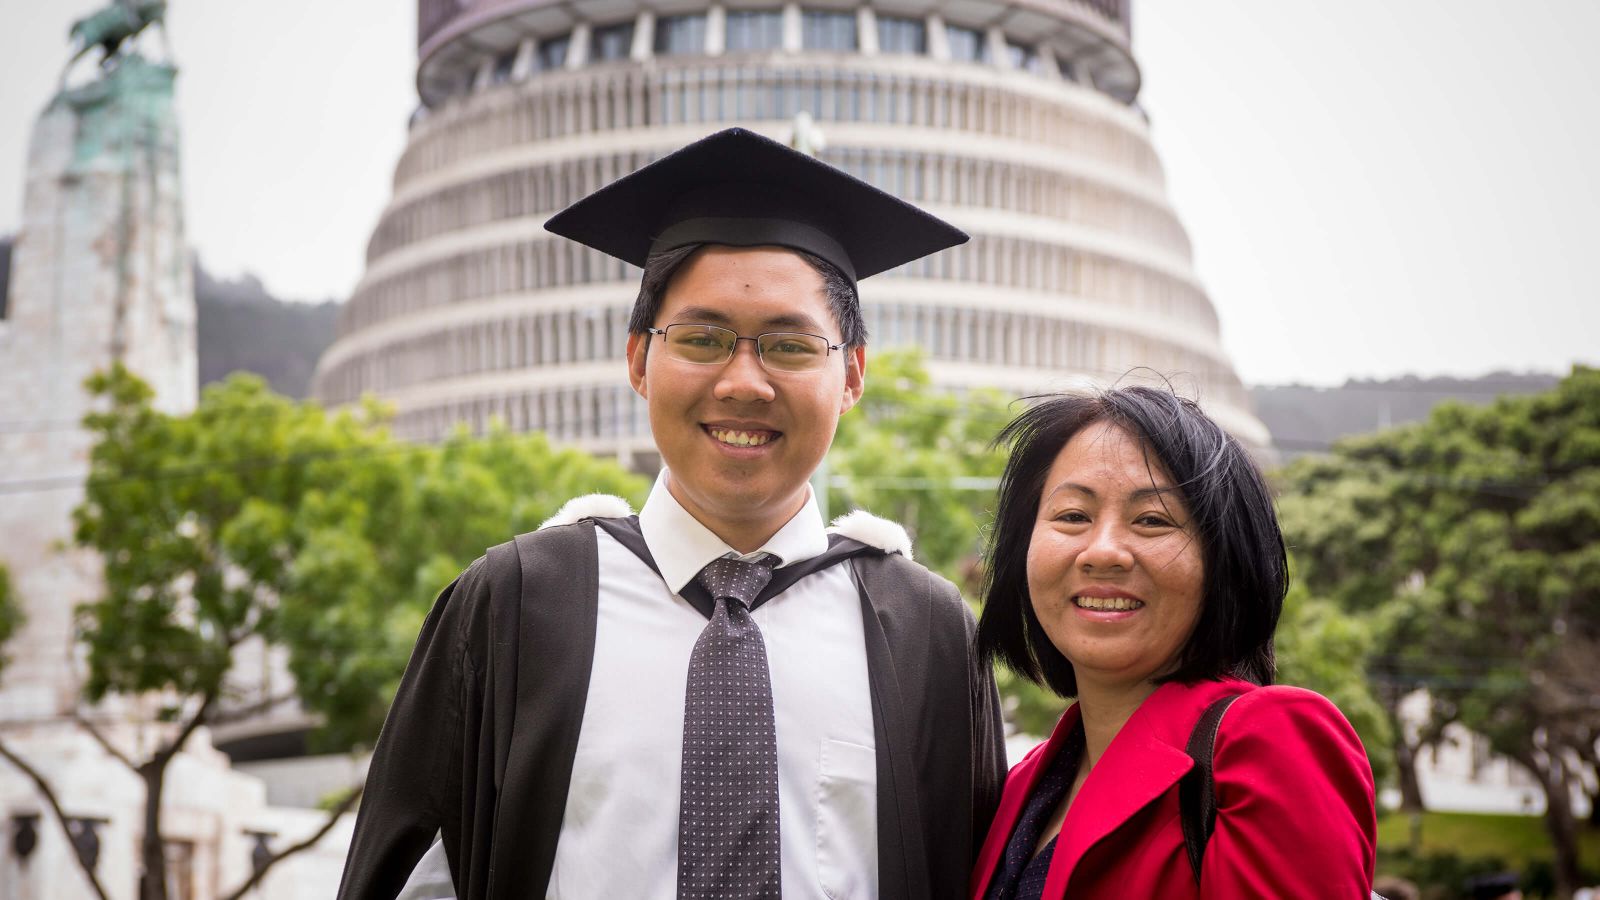 Male student with family member in graduation gown in front of parliament Beehive.